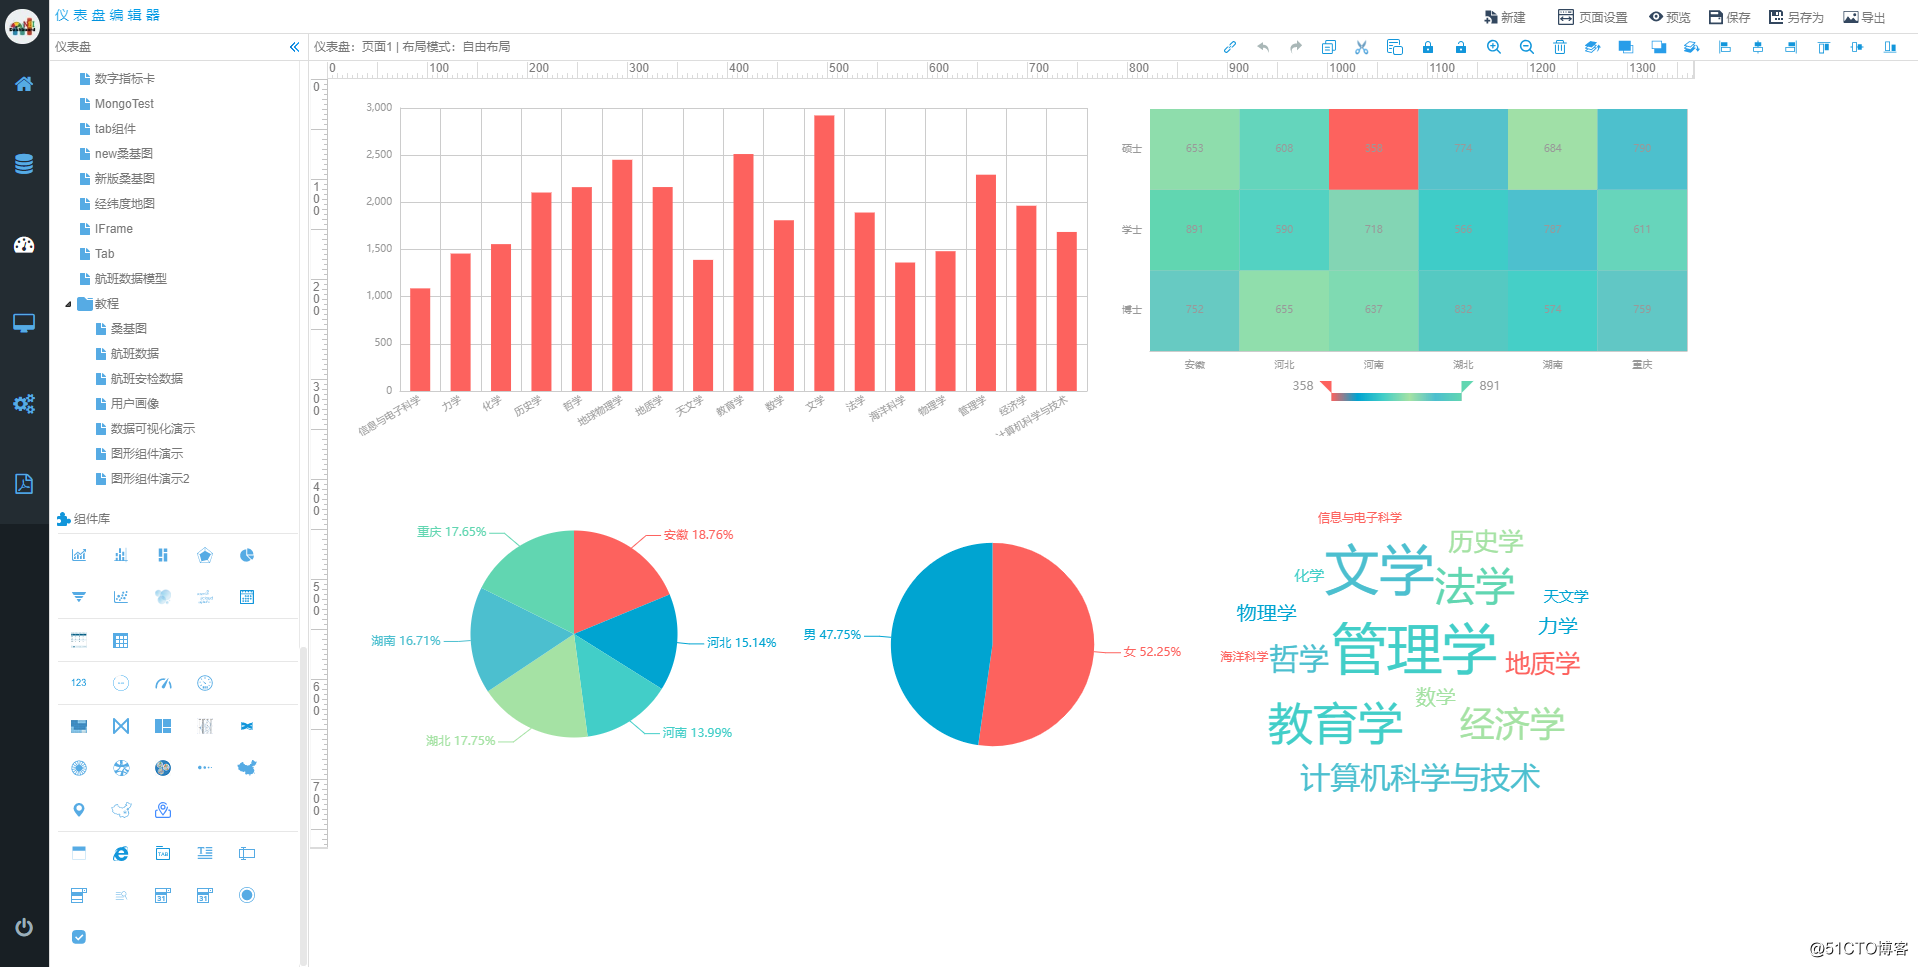 Large data visualization analysis, we usually realize how fast it